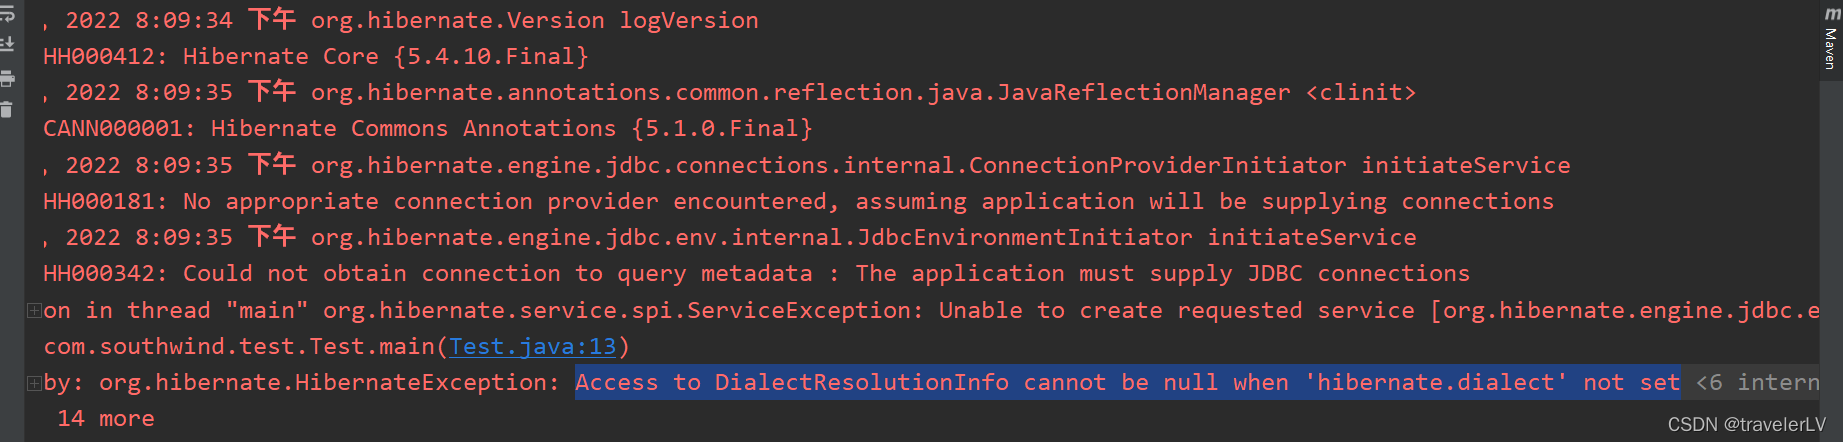 Access To Dialectresolutioninfo Cannot Be Null When 'Hibernate.Dialect' Not  Set_Travelerlv的博客-Csdn博客